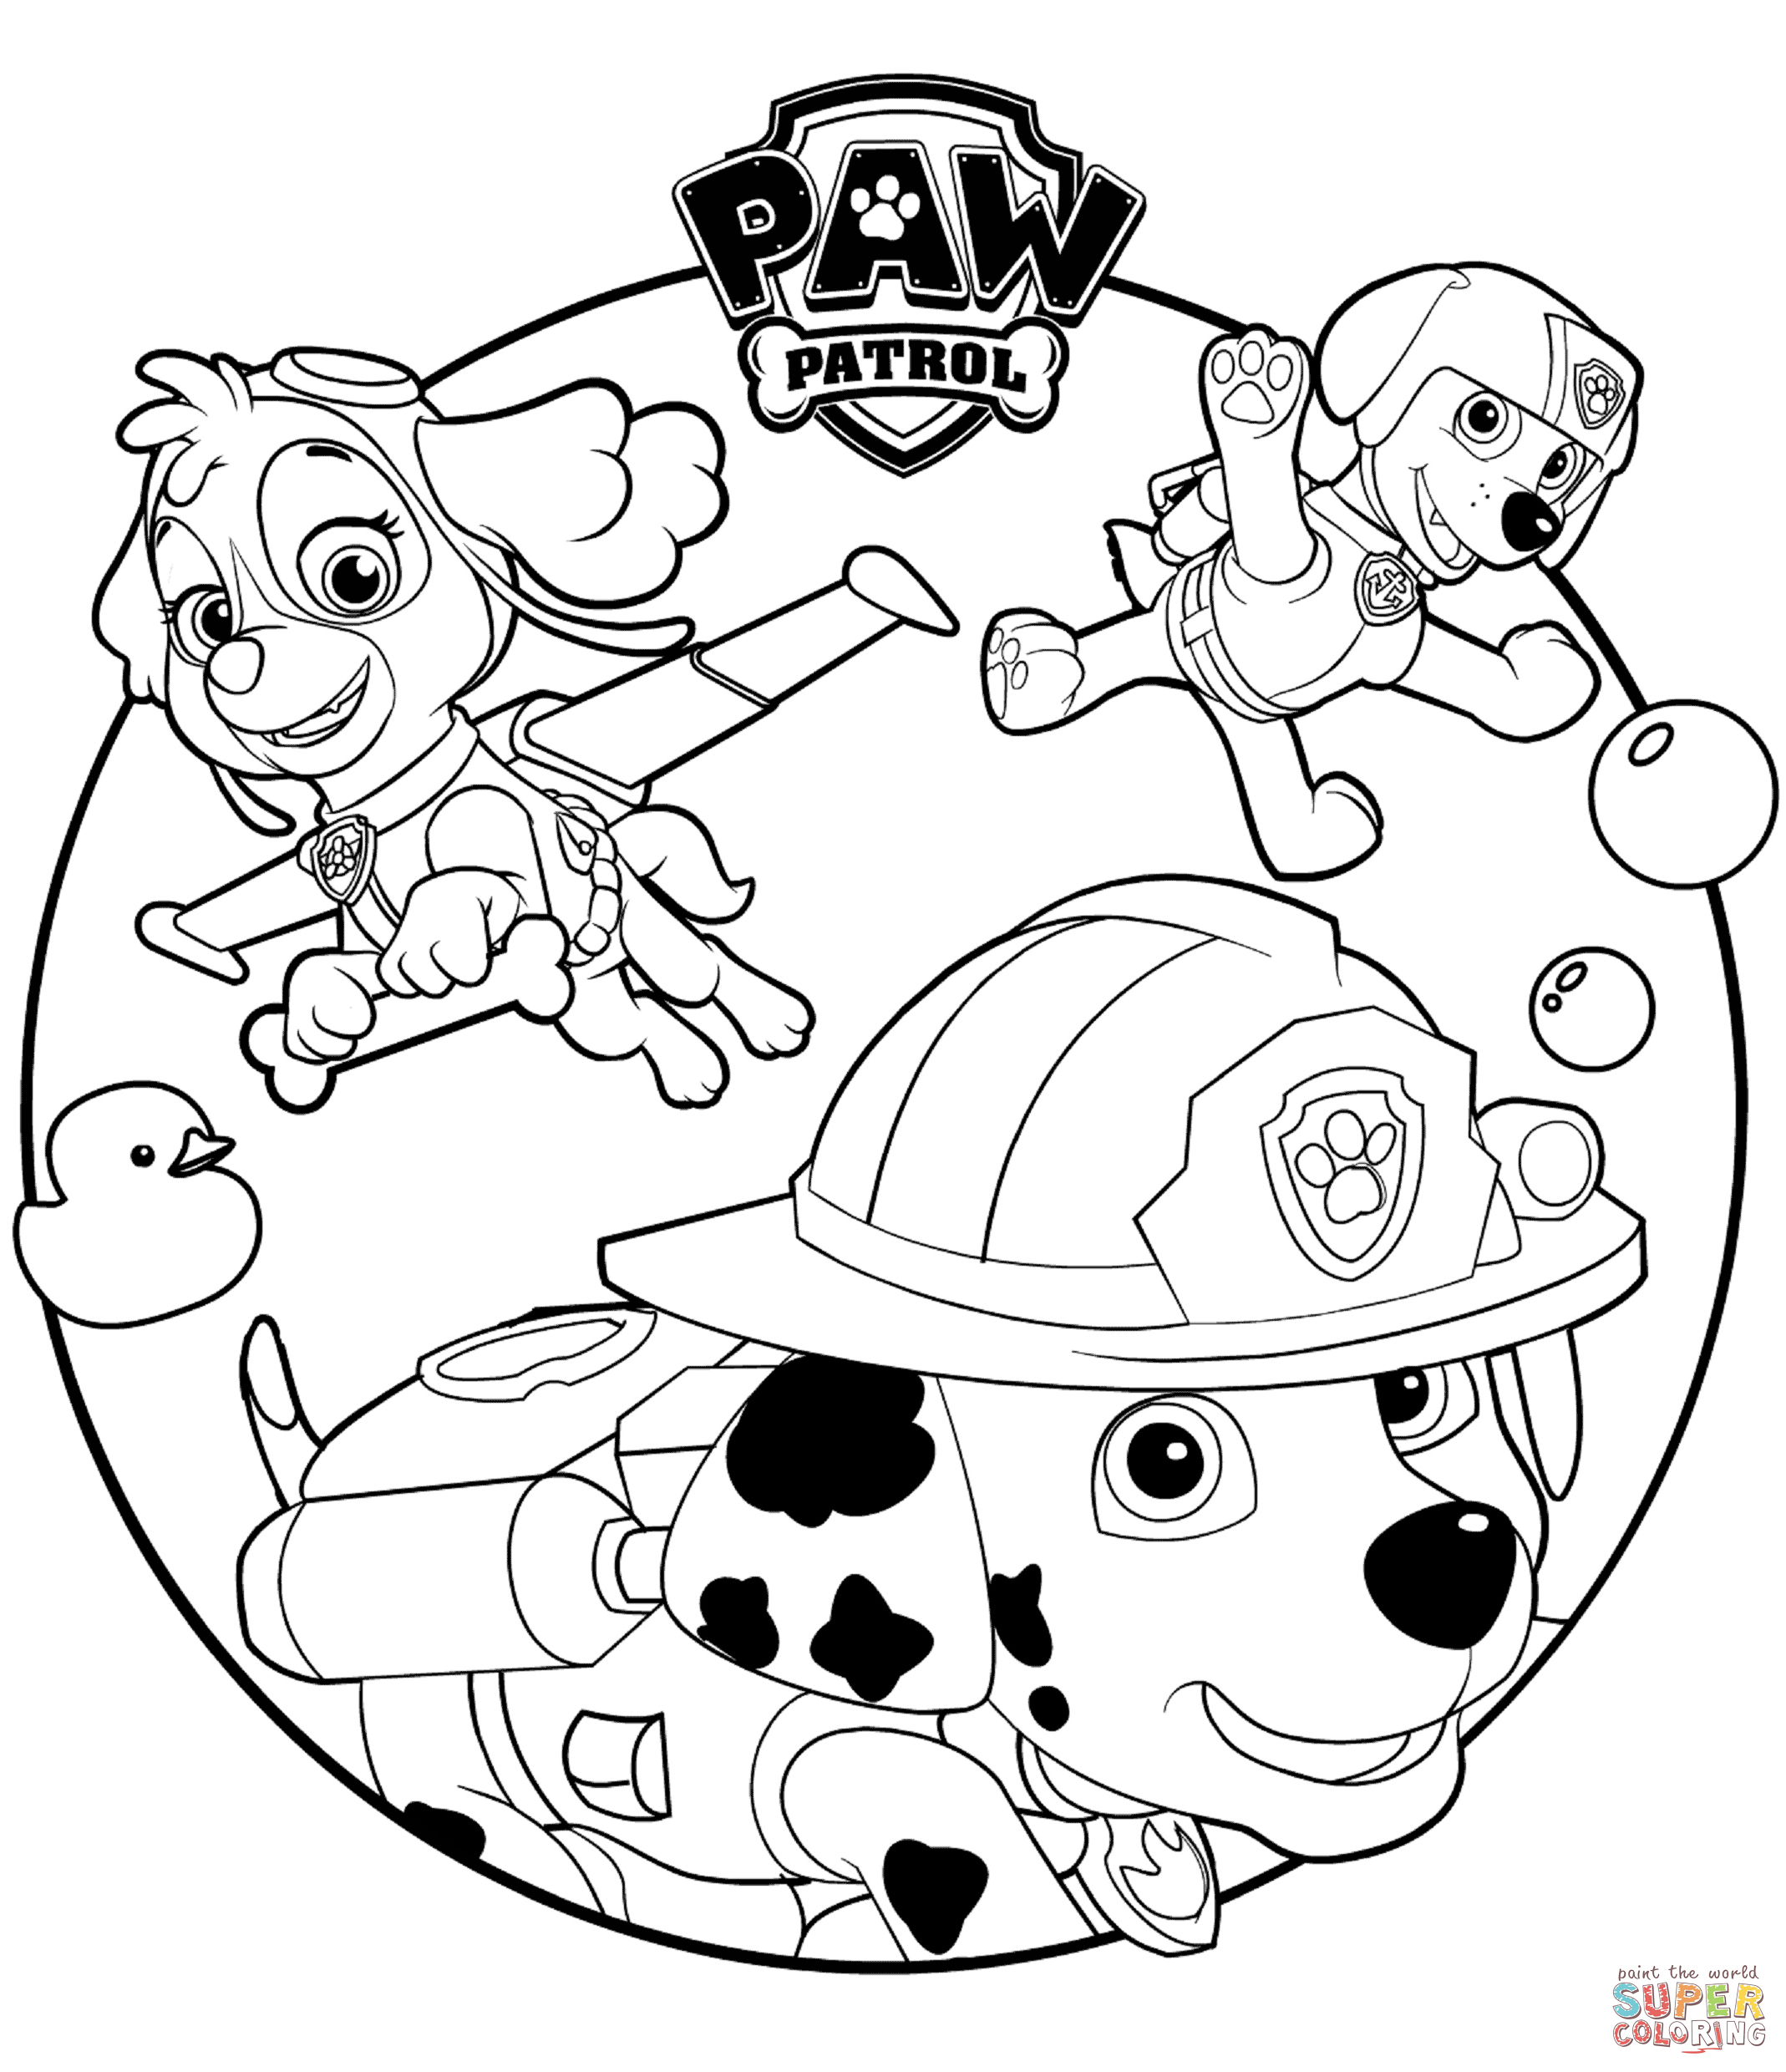 Paw Patrol Coloring Pages Marshall Paw Patrol Coloring Pages Free Coloring Pages